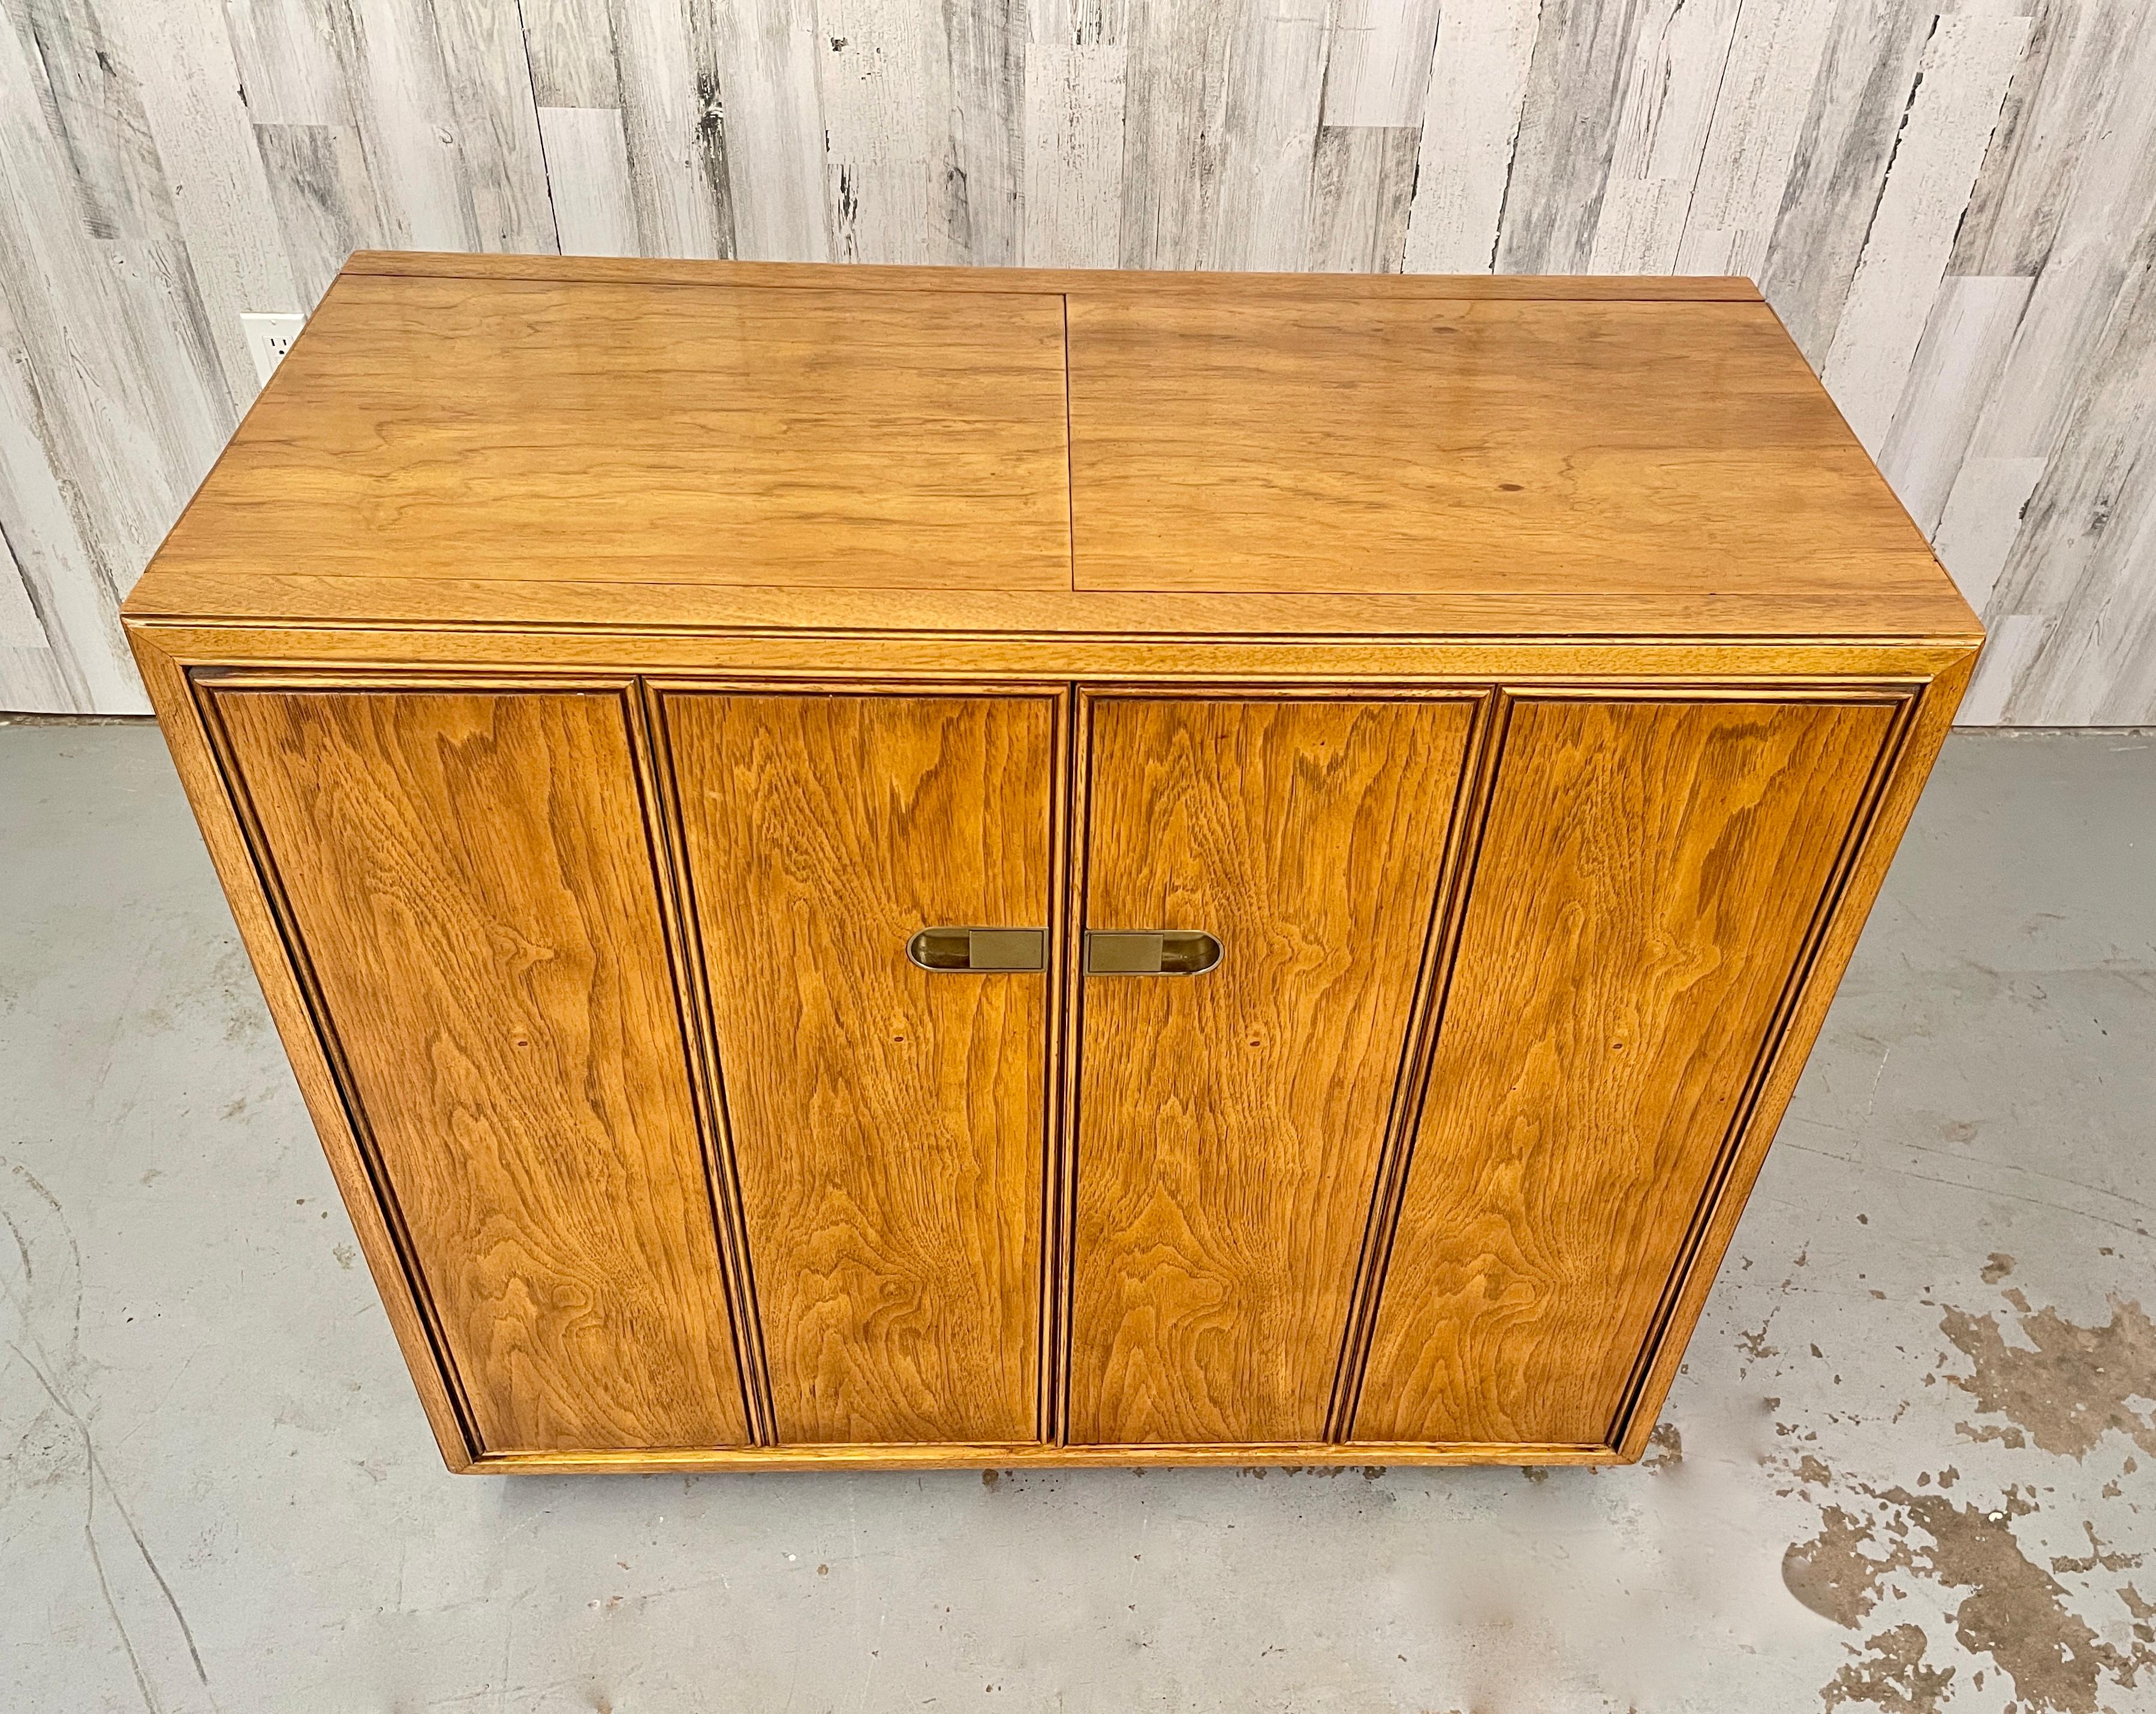 Drexel Extendable Top Liquor/Bar Cabinet with brass accents. This Piece has a nice finished back so it can easily be floated. This piece can be wheeled around a home with minimal effort- perfect for those who love to entertain! Width with both